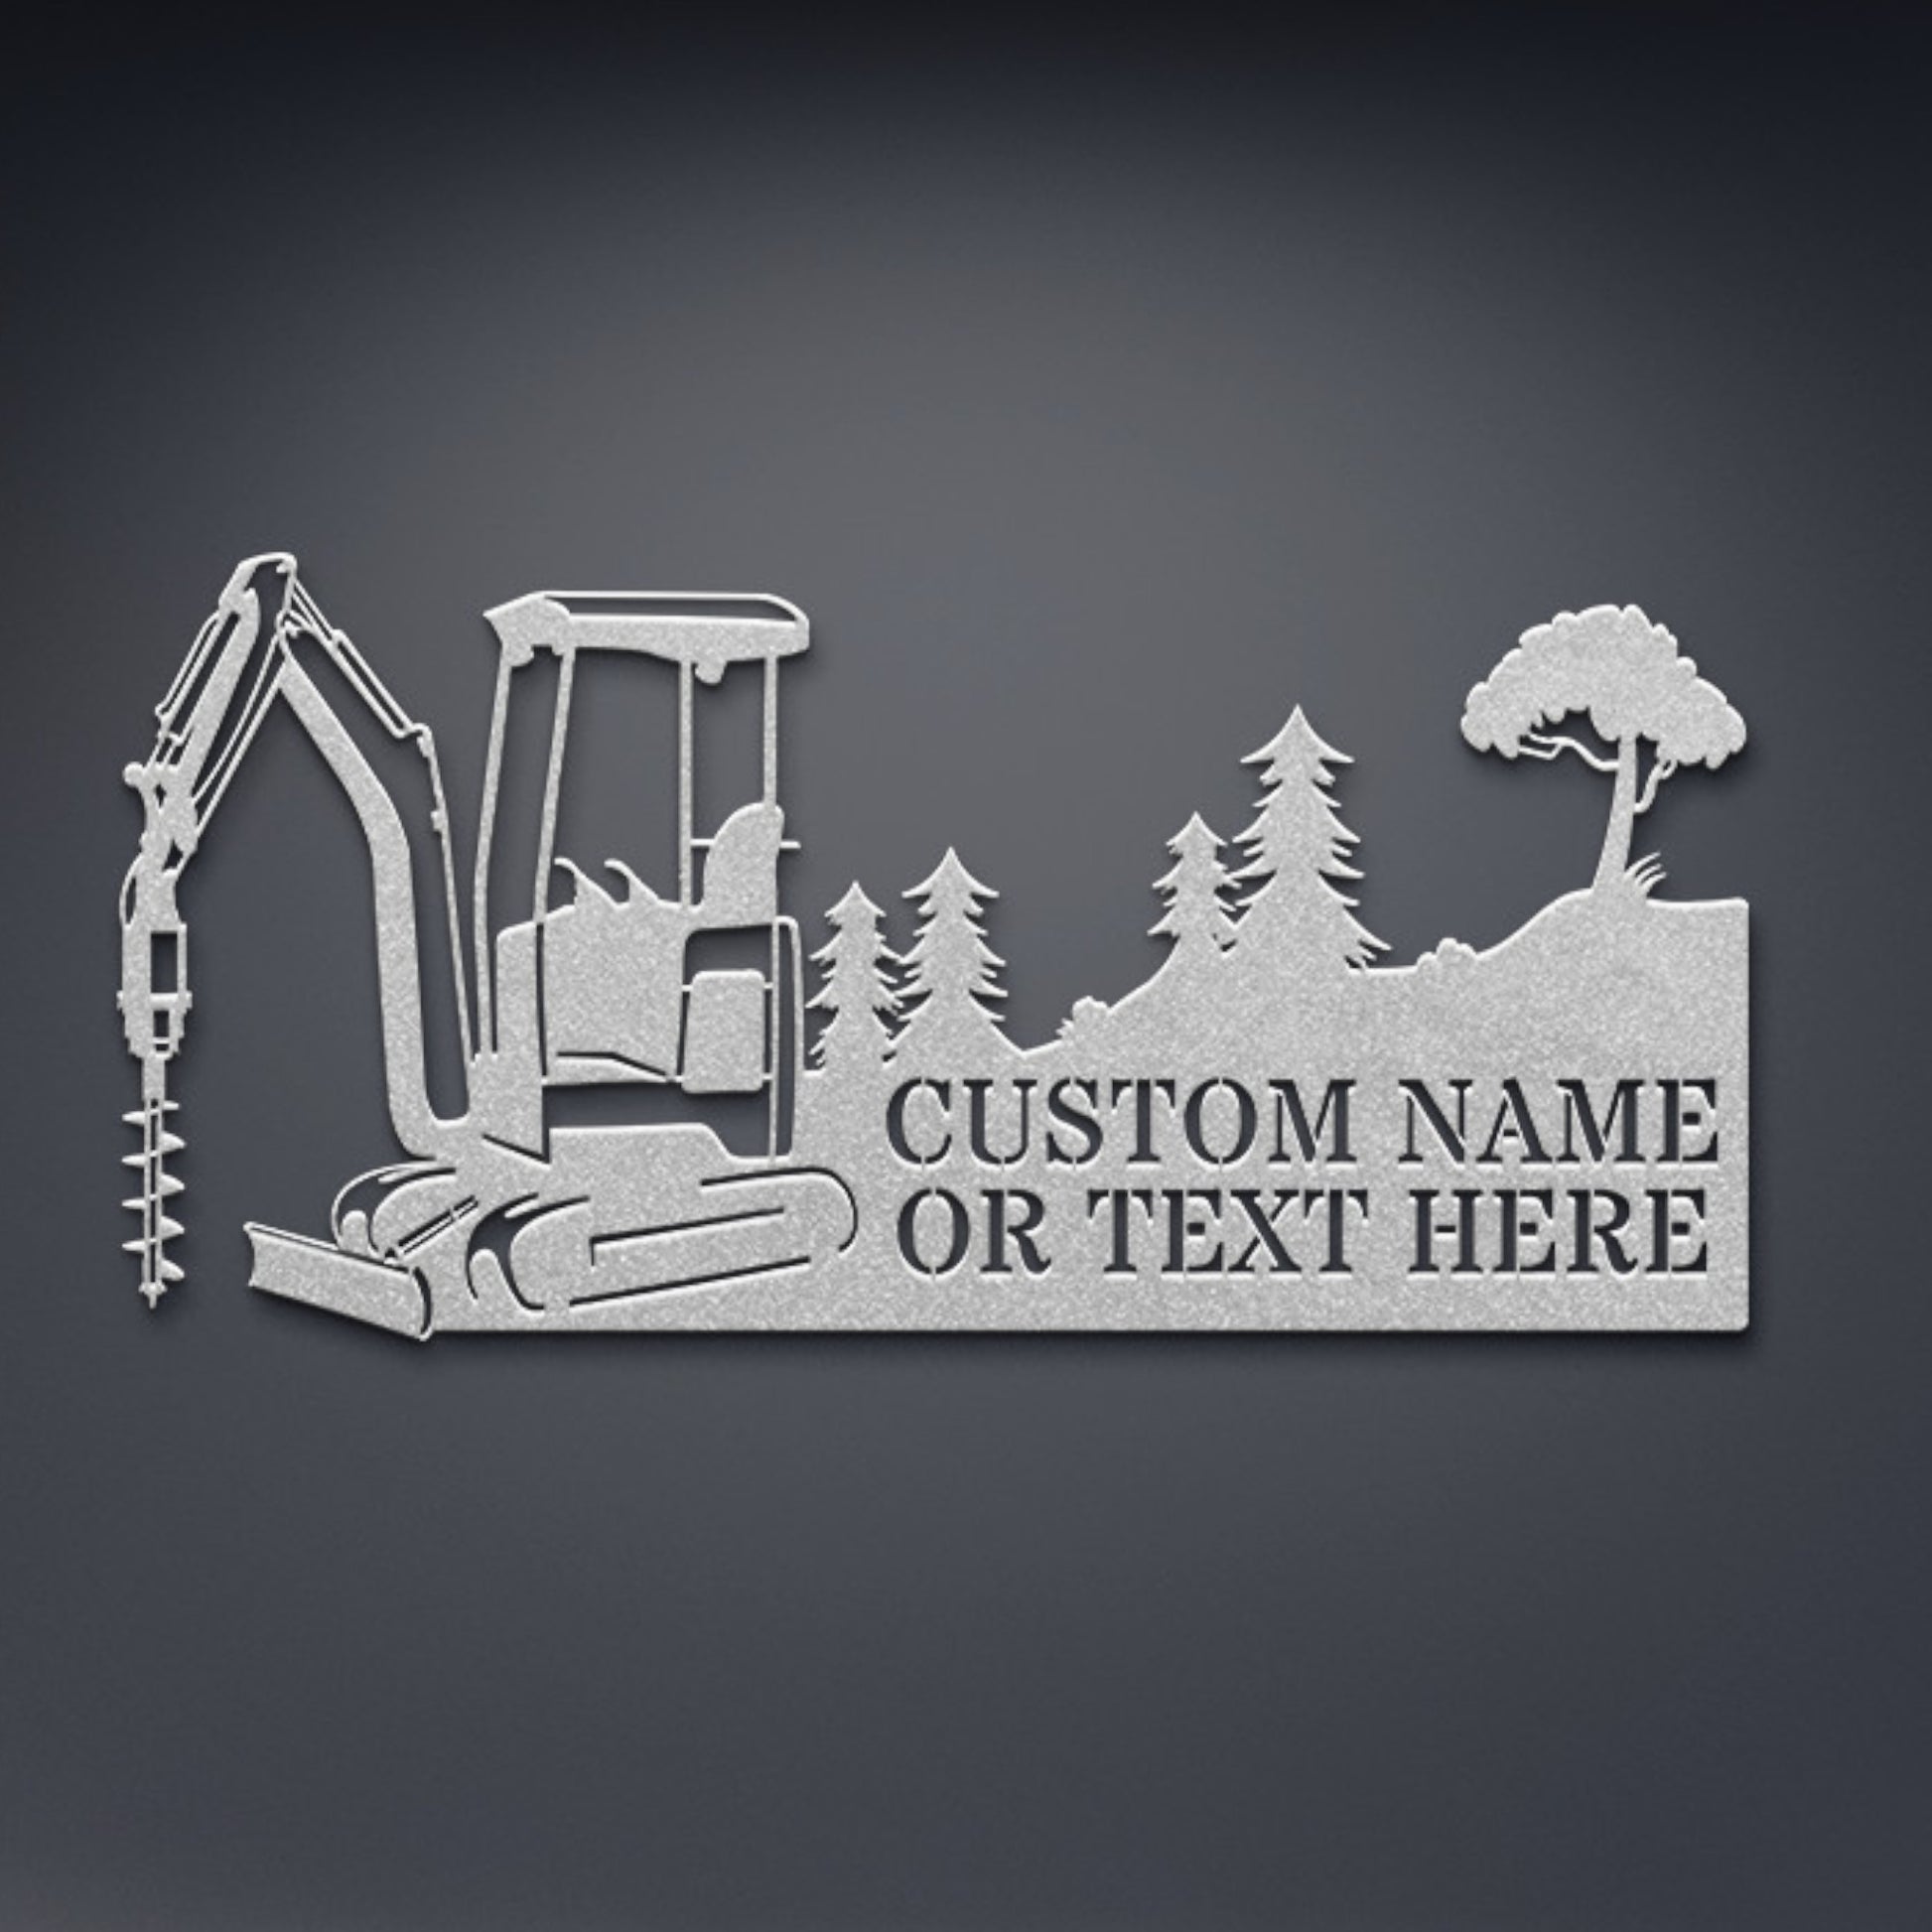 Personalized Drilling Name Machinery Metal Sign. Custom Drill Equipment Wall Decor Gift. Skid Steer Wall Hanging Gift. Construction Worker